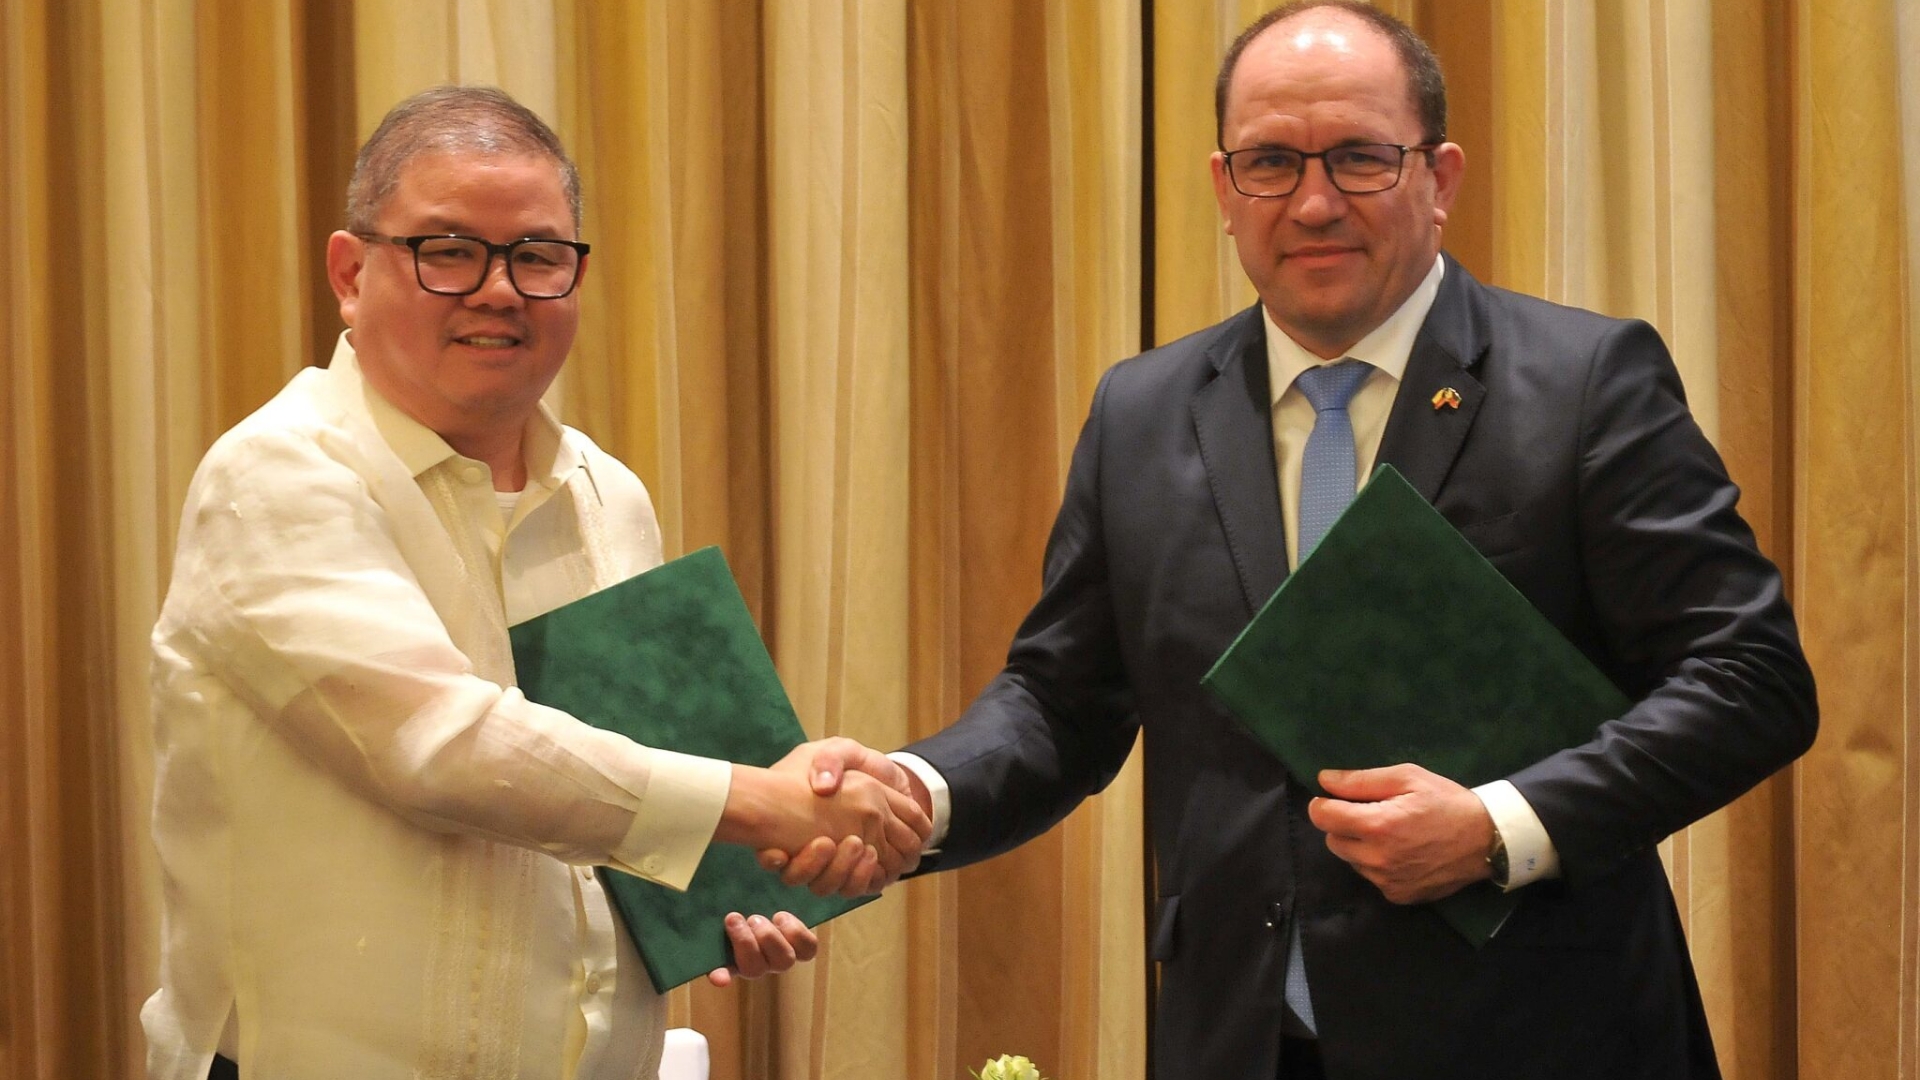 PH and Czech Republic to enhance cooperation in agriculture